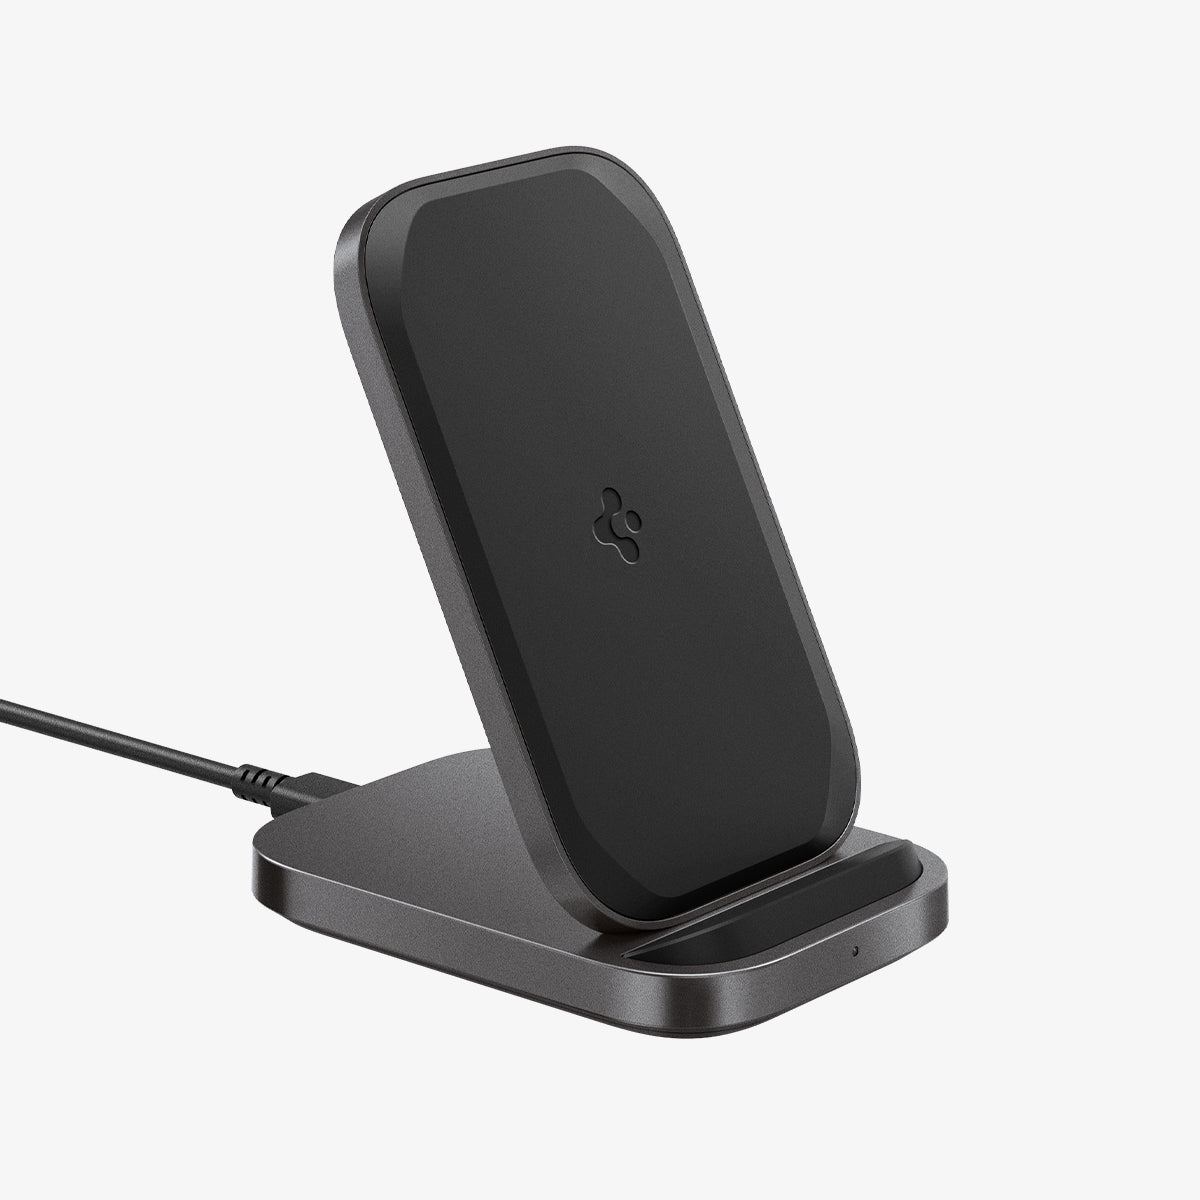 ACH06254 - ArcField PF2102 Wireless Charger in black showing the front and side view